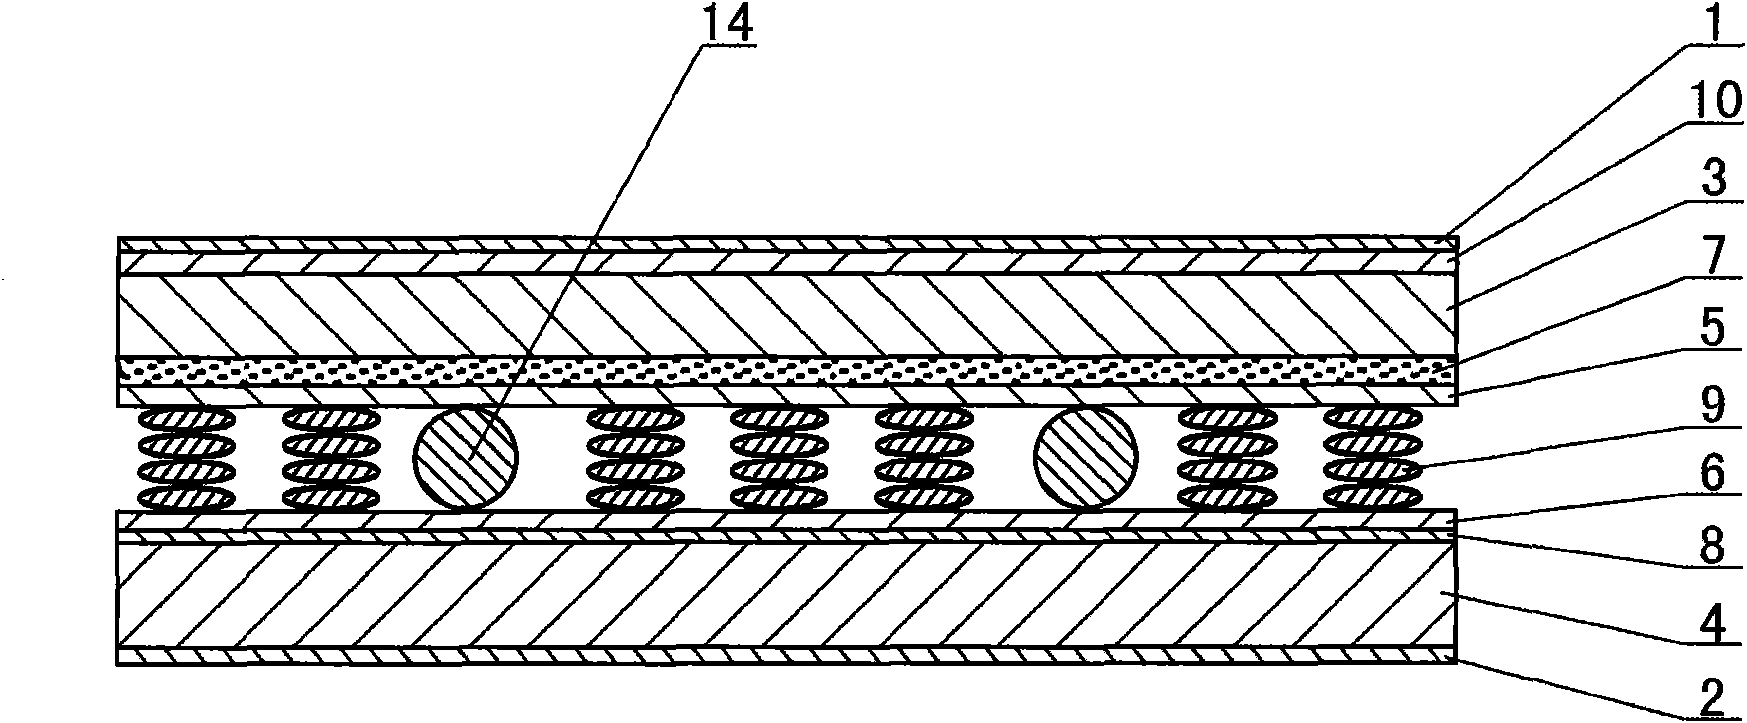 Embedded touch-sensitive type multi-steady-state liquid crystal device